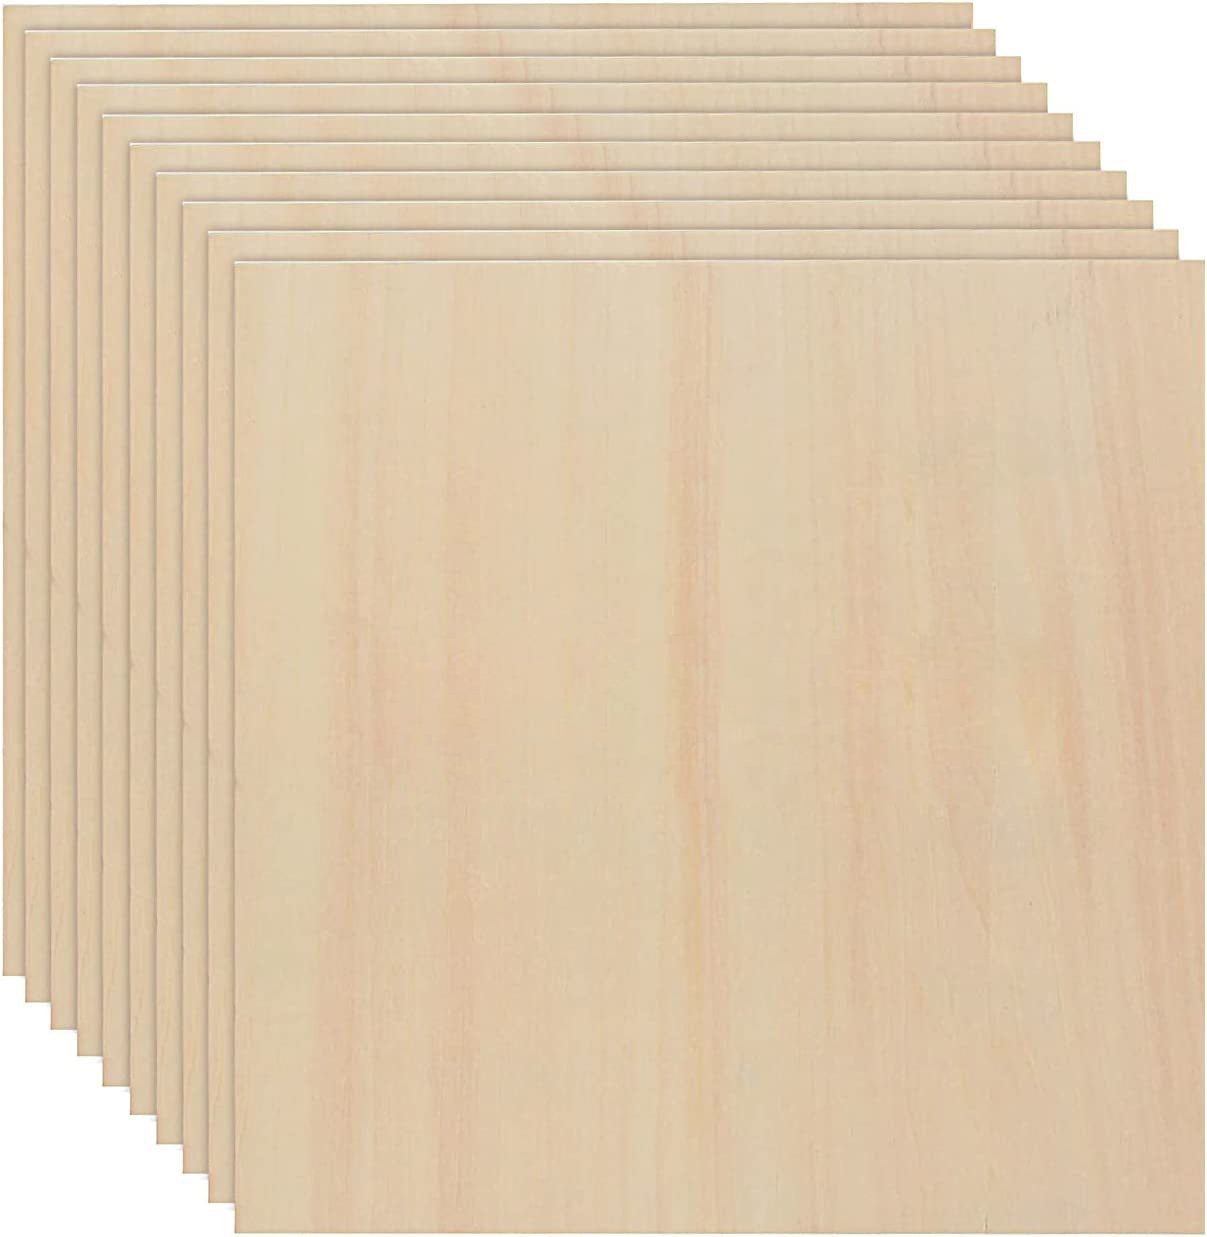 20 PCS Basswood Sheets 12X12 Inch Unfinished Square Wood Pieces for Crafting  Ply